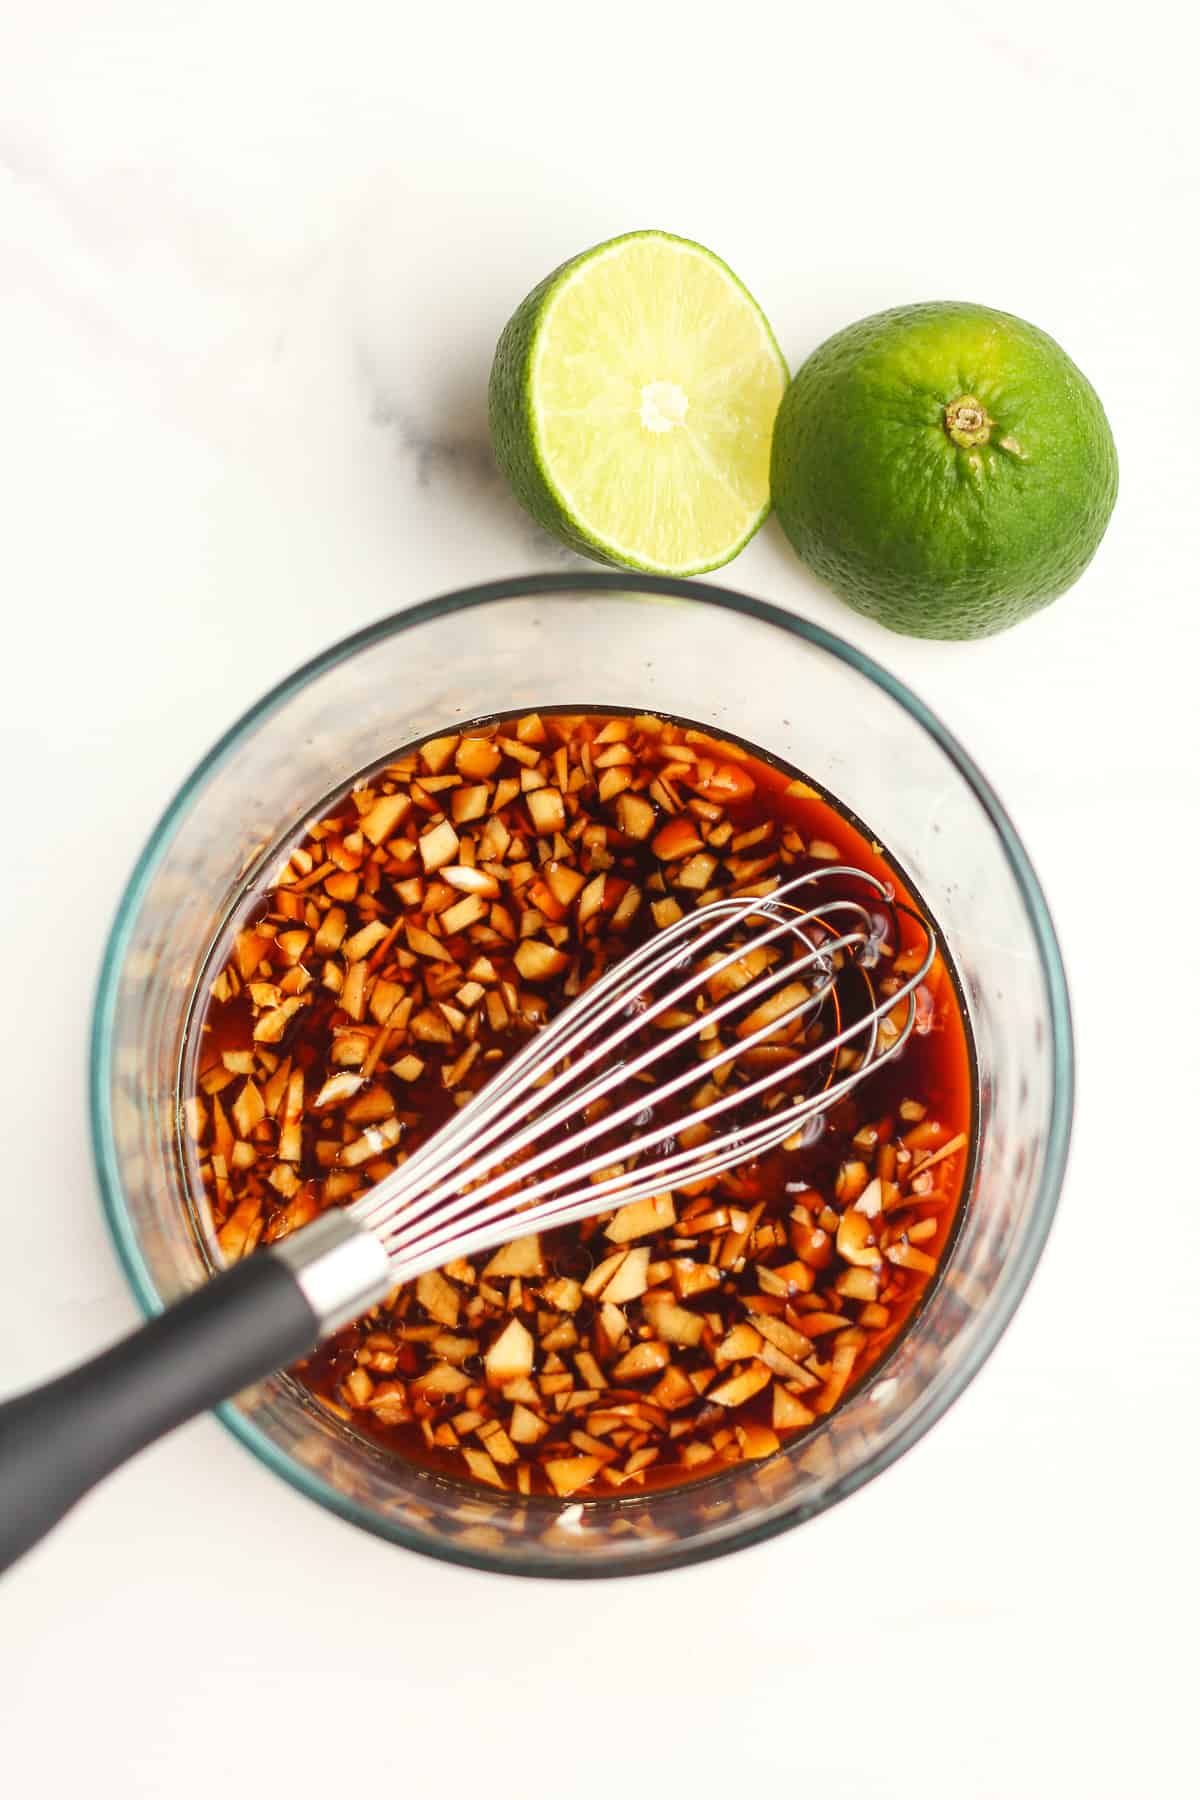 A bowl of the Asian marinade with limes.